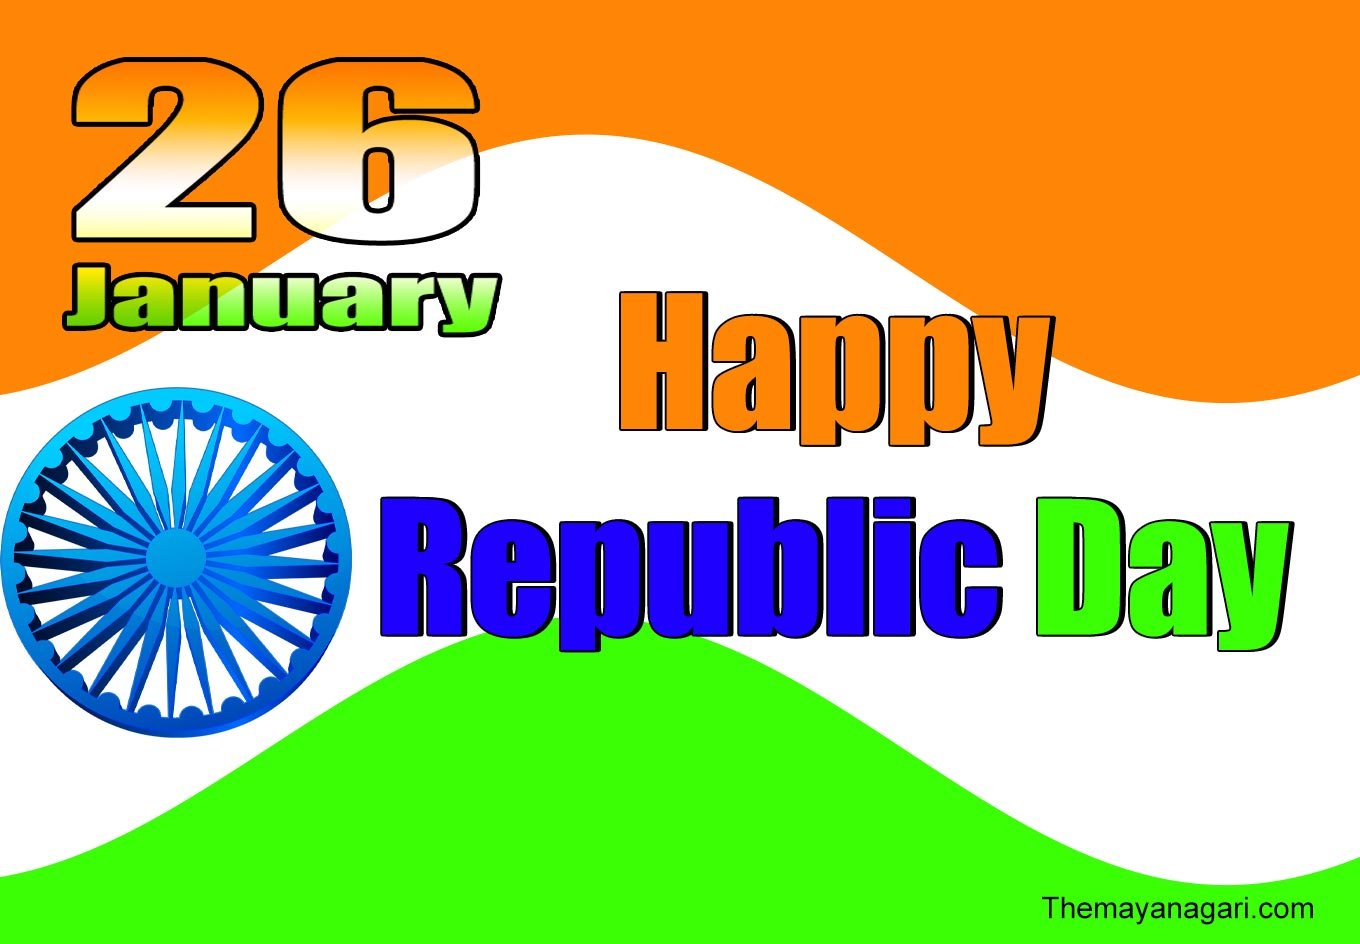 Happy Republic Day 26 January Photo Free Download